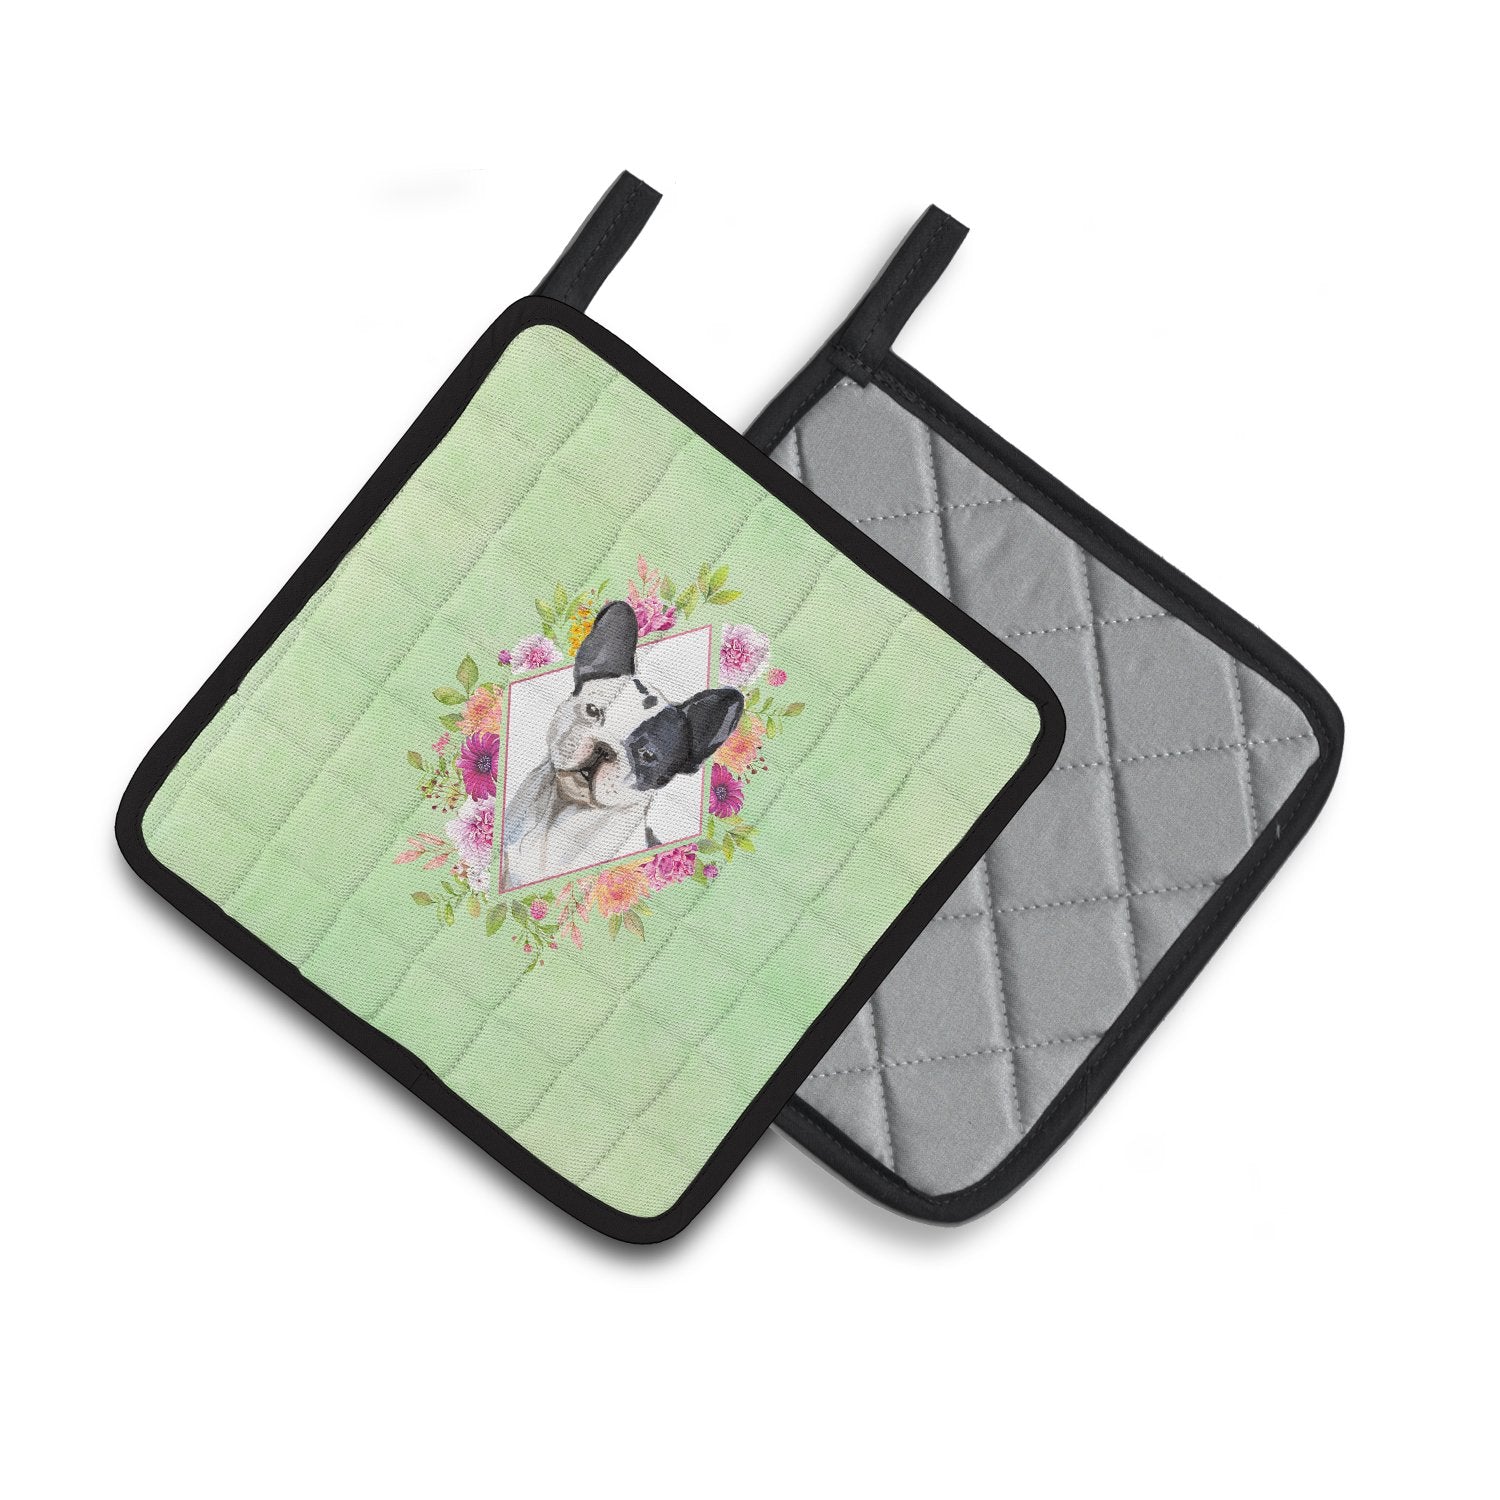 Black and White Frenchie Green Flowers Pair of Pot Holders CK4420PTHD by Caroline's Treasures